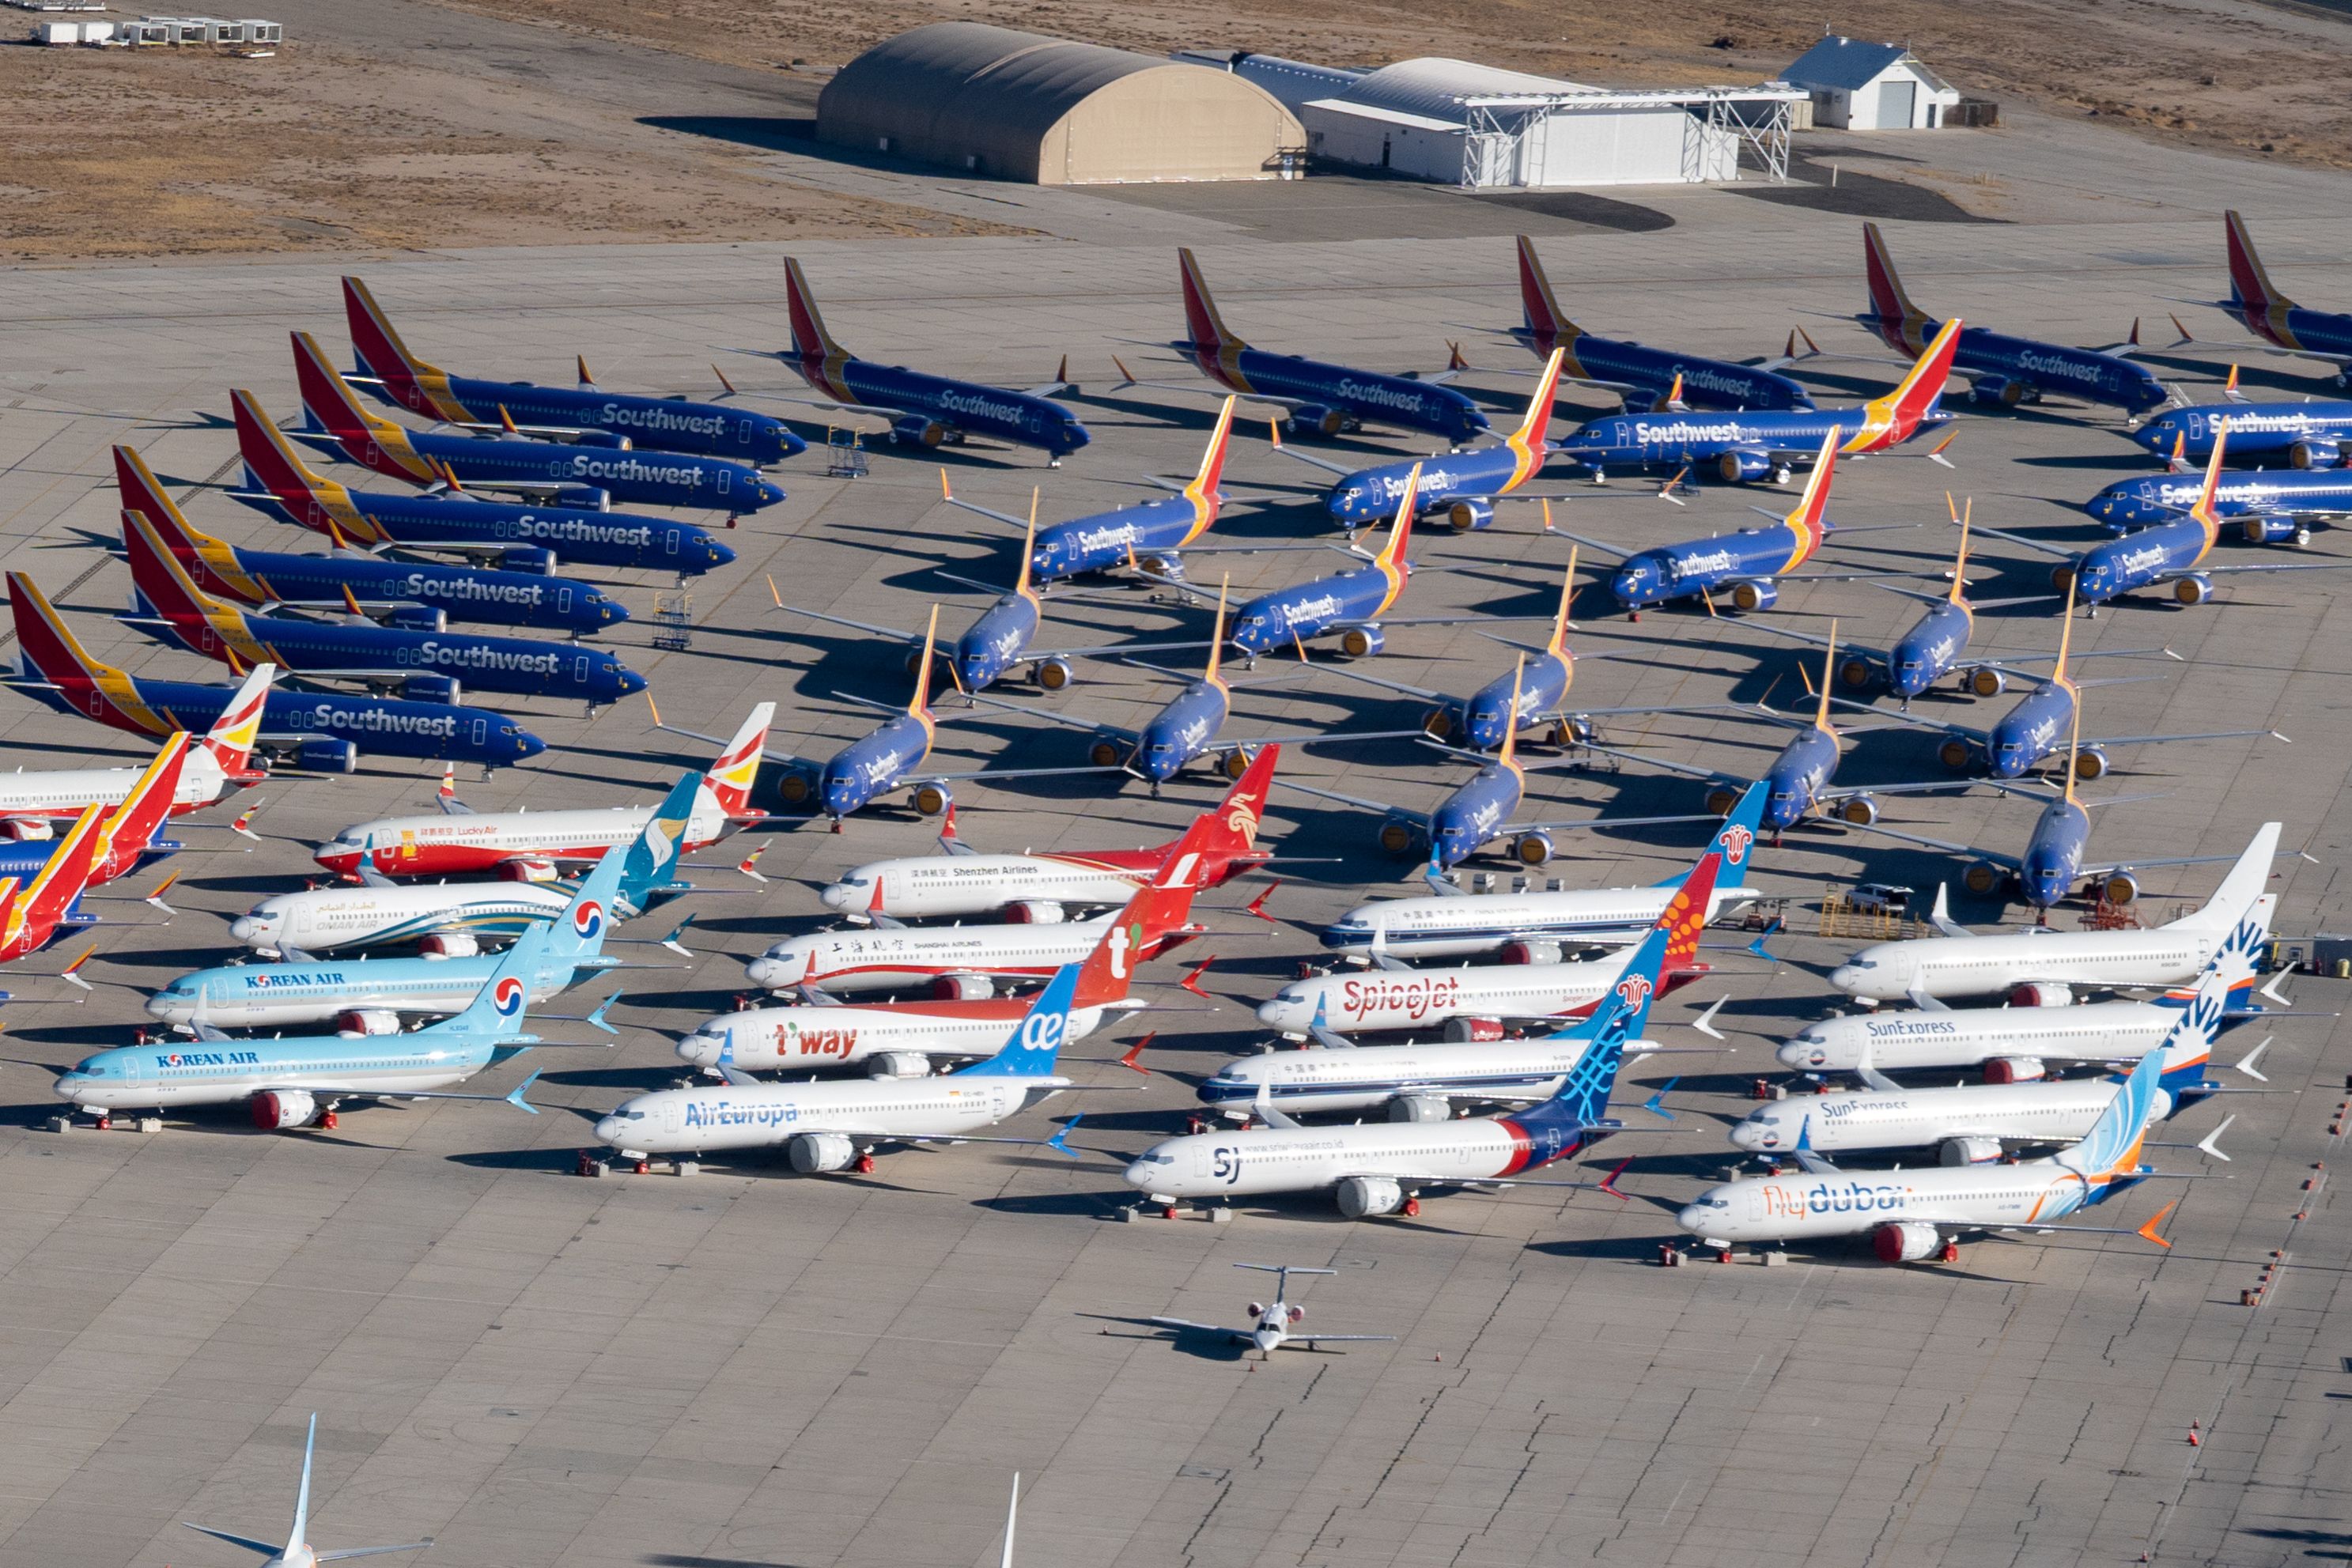 Dozens of Boeing 737 MAX 8 aircraft from many airlines parked at an airfield.